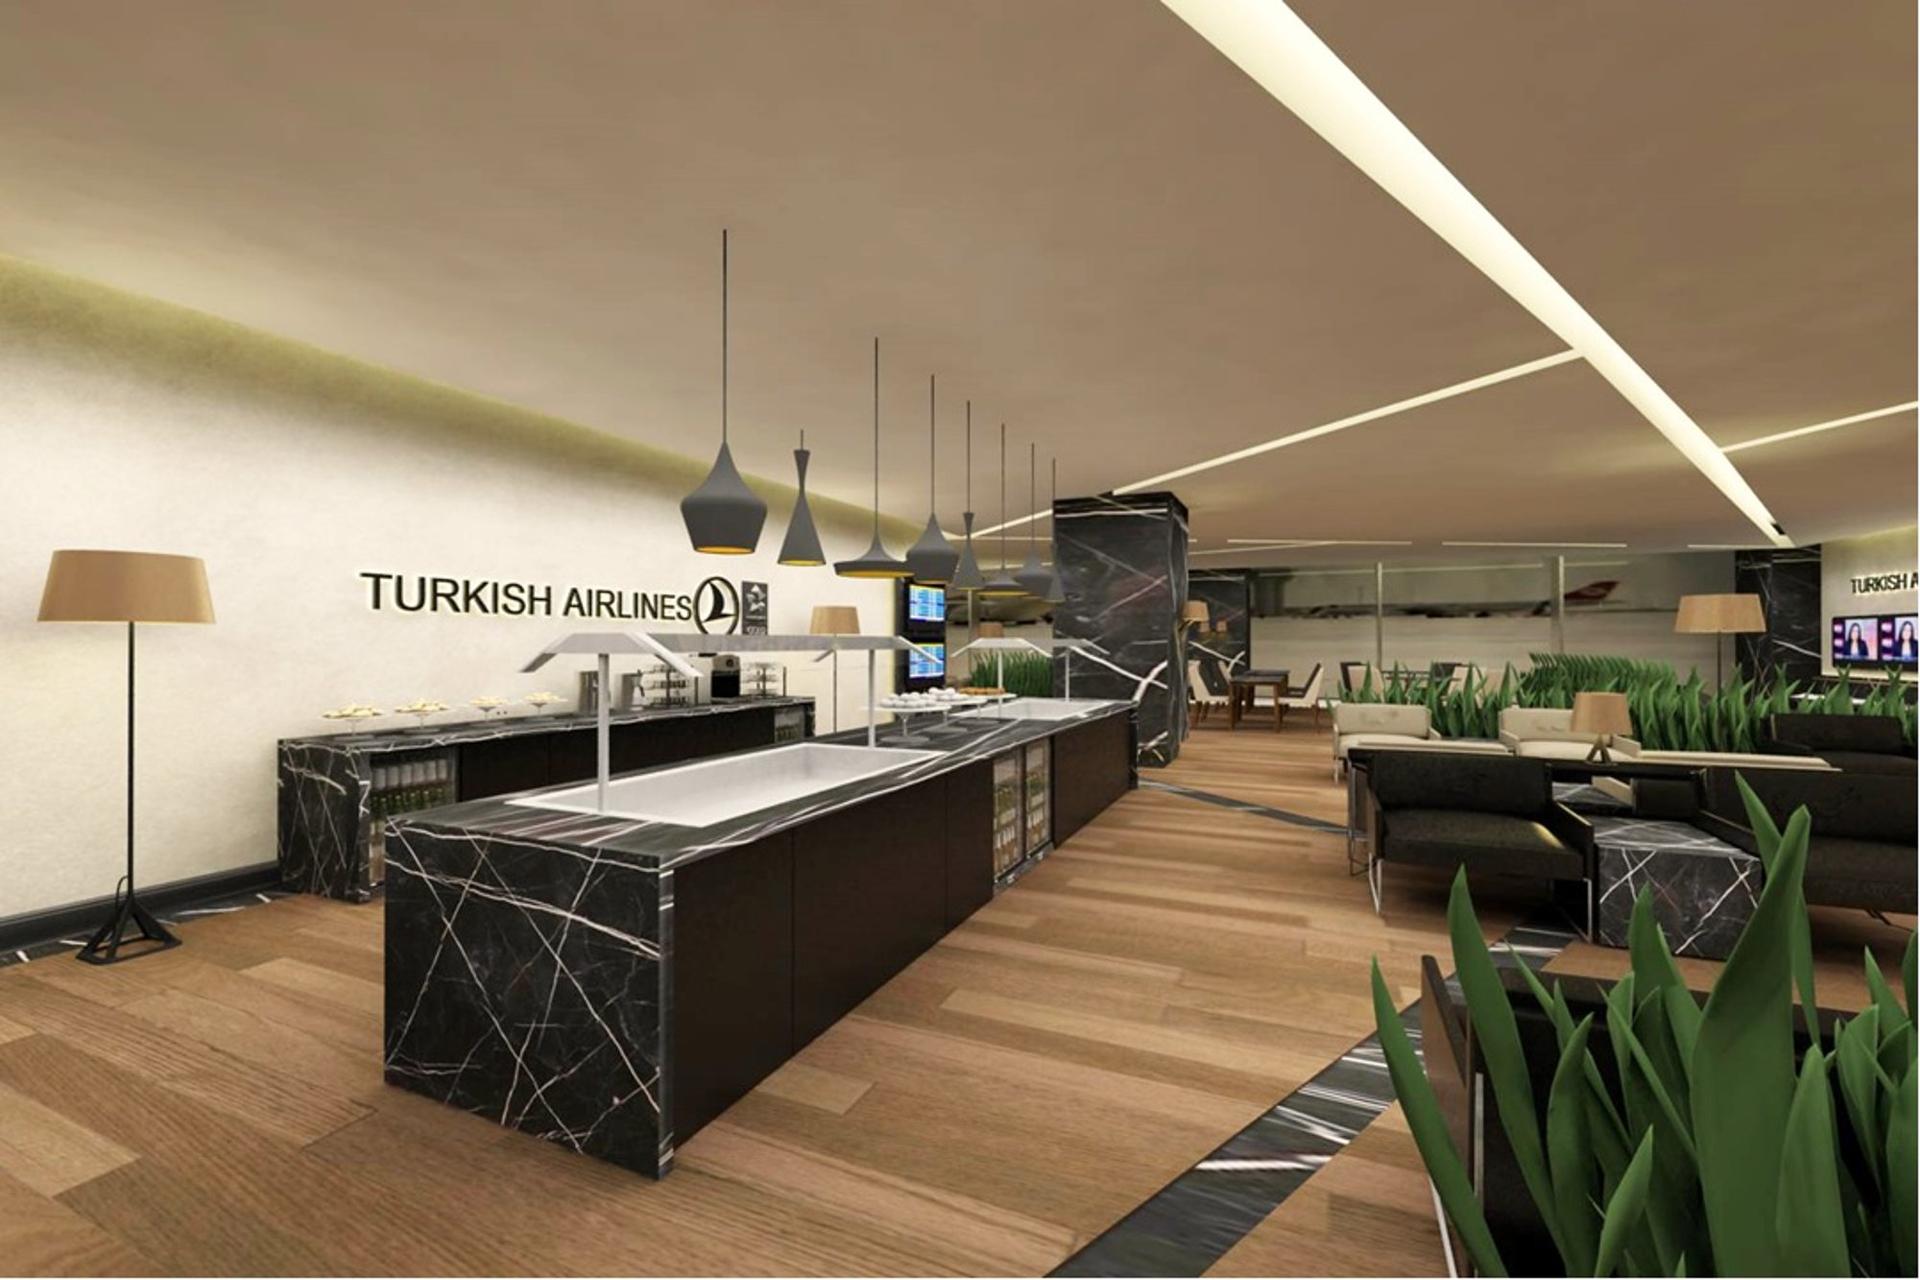 Turkish Airlines CIP Lounge (Business Lounge) image 17 of 27